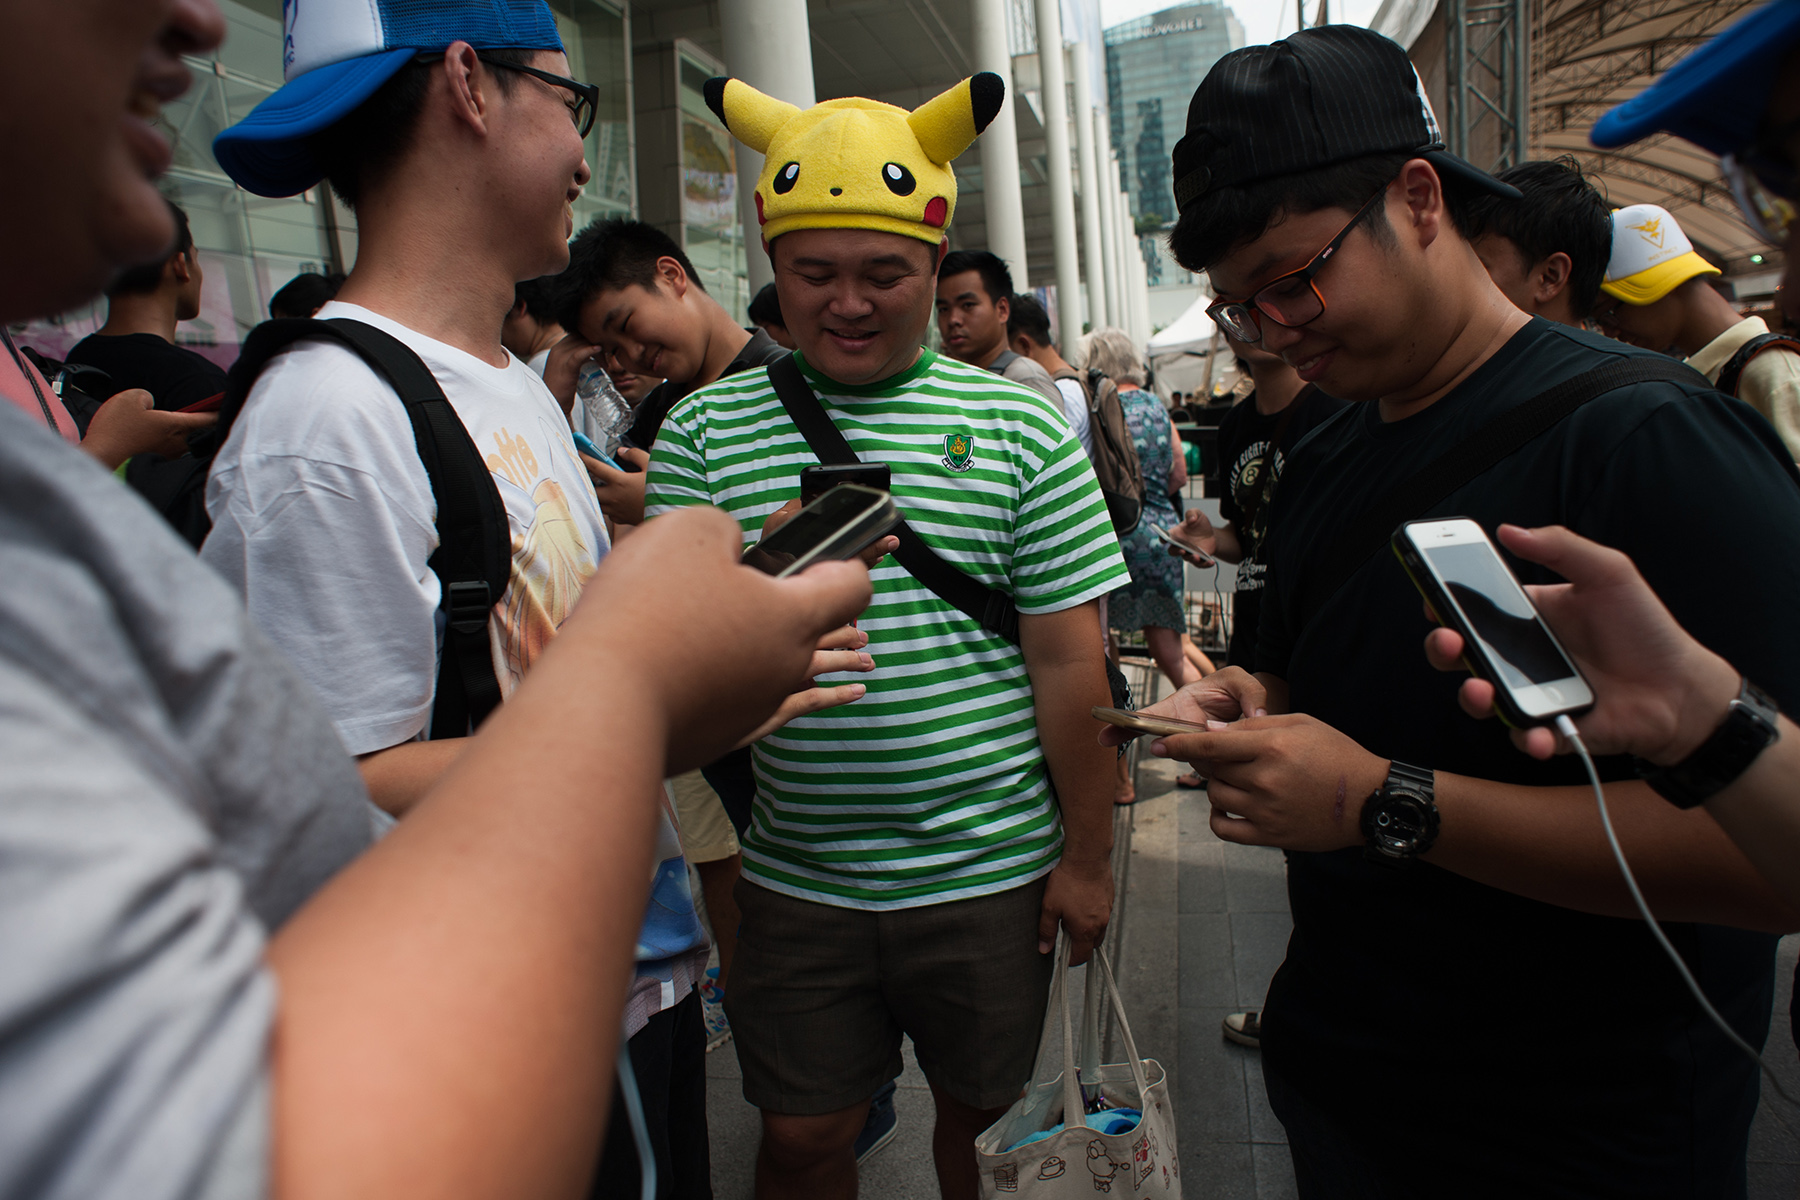 Thai 'Pokemon Go' players gather to play the game on their smartphones at a shopping mall in Bangkok, Thailand

